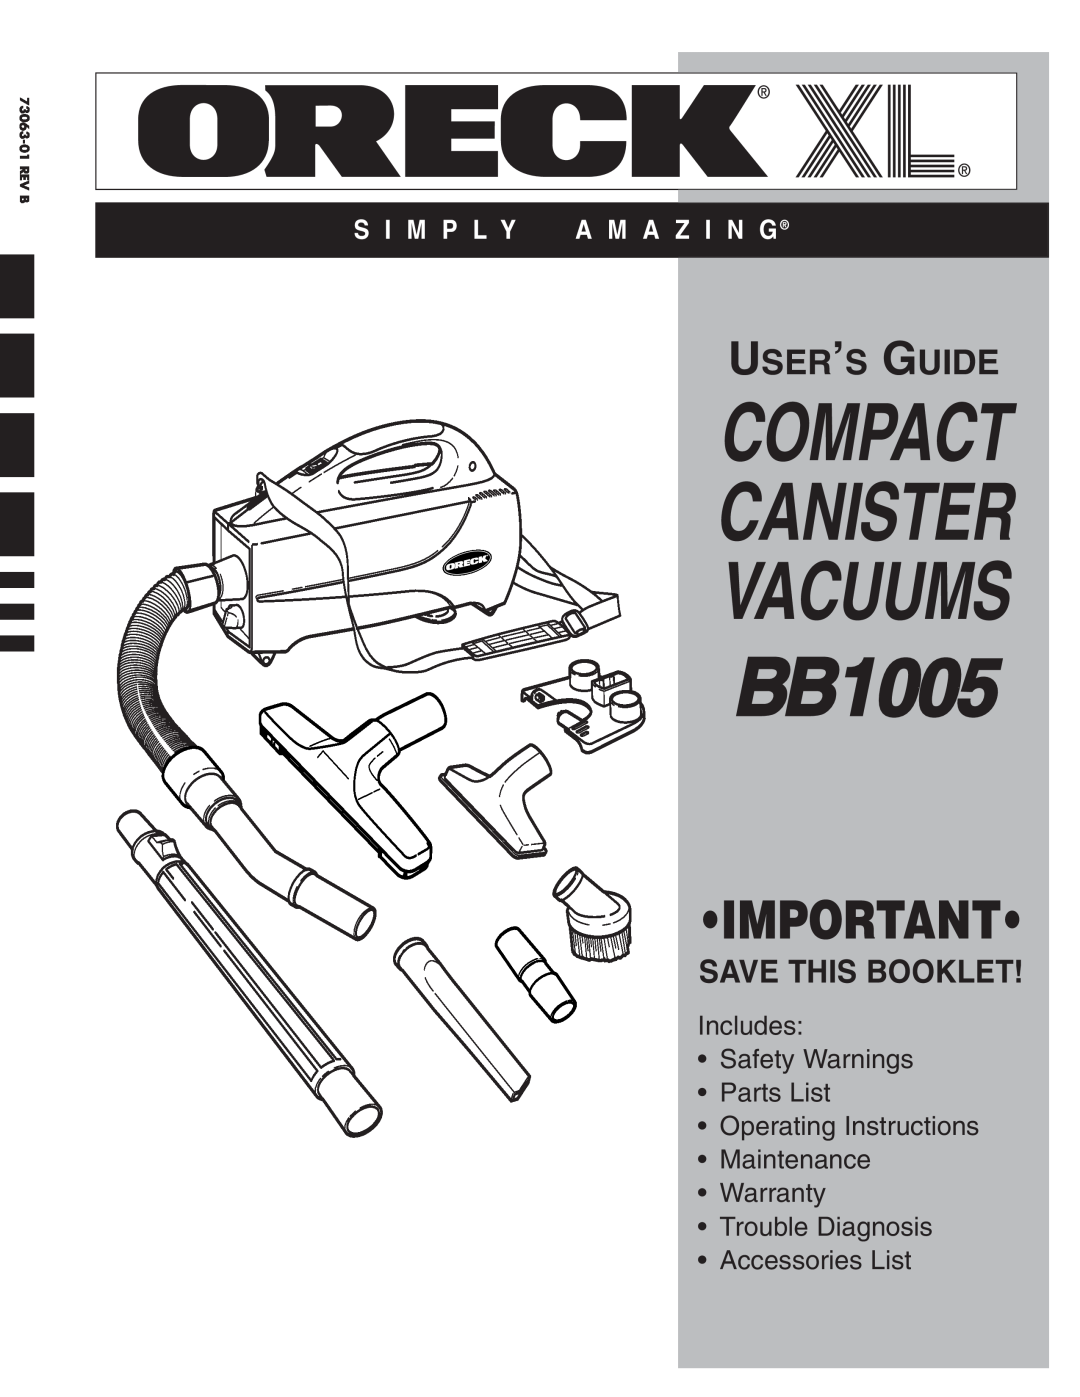 Oreck BB1005 warranty Compact Canister Vacuums, User’S Guide, Save This Booklet, S I M P L Y A M A Z I N G, 73063-01REV B 